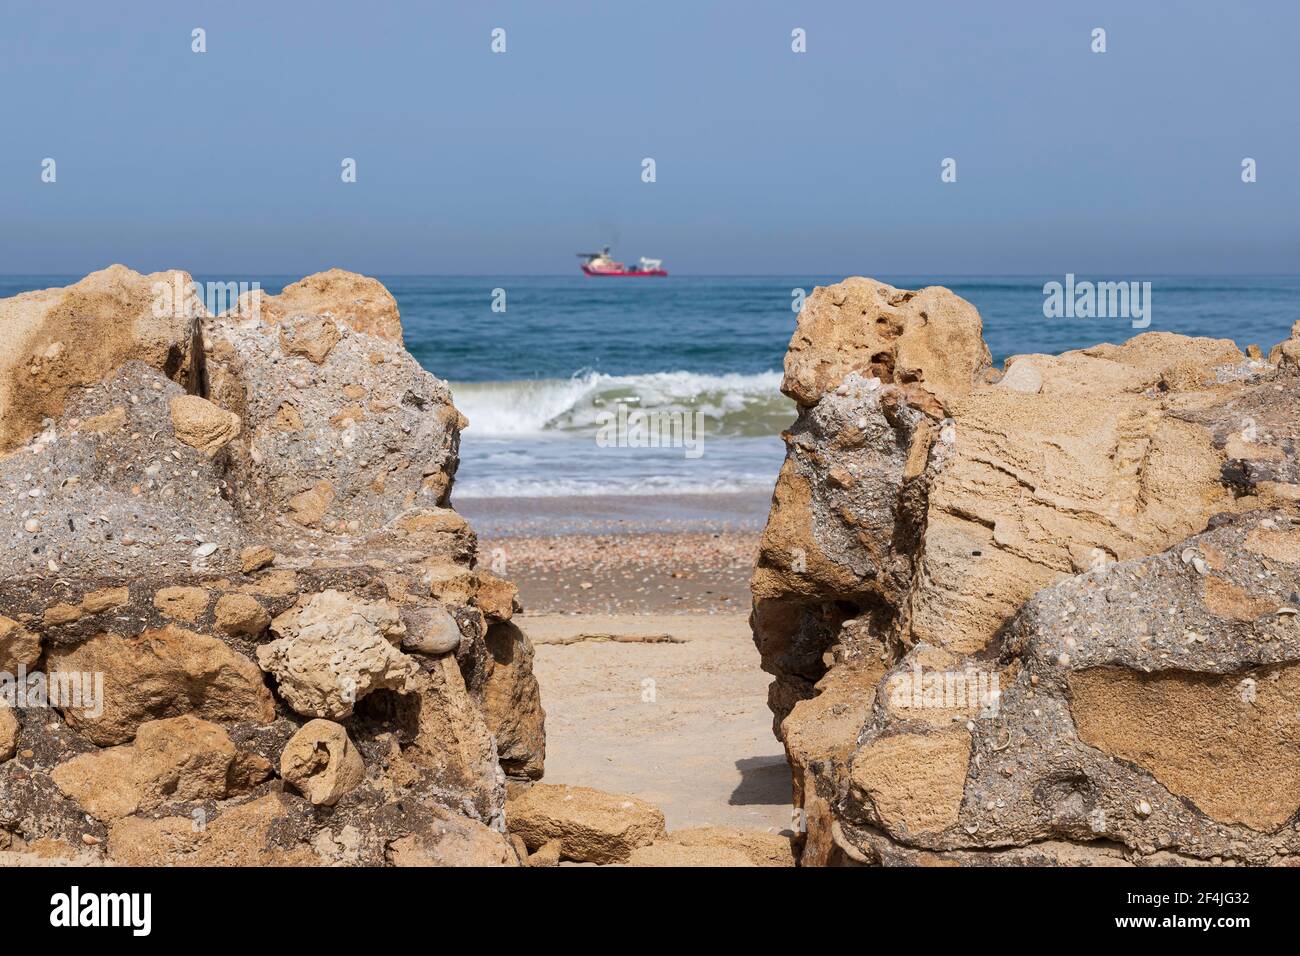 View of the Mediterranean Sea and the ship through the shell rock formations on the shore Stock Photo